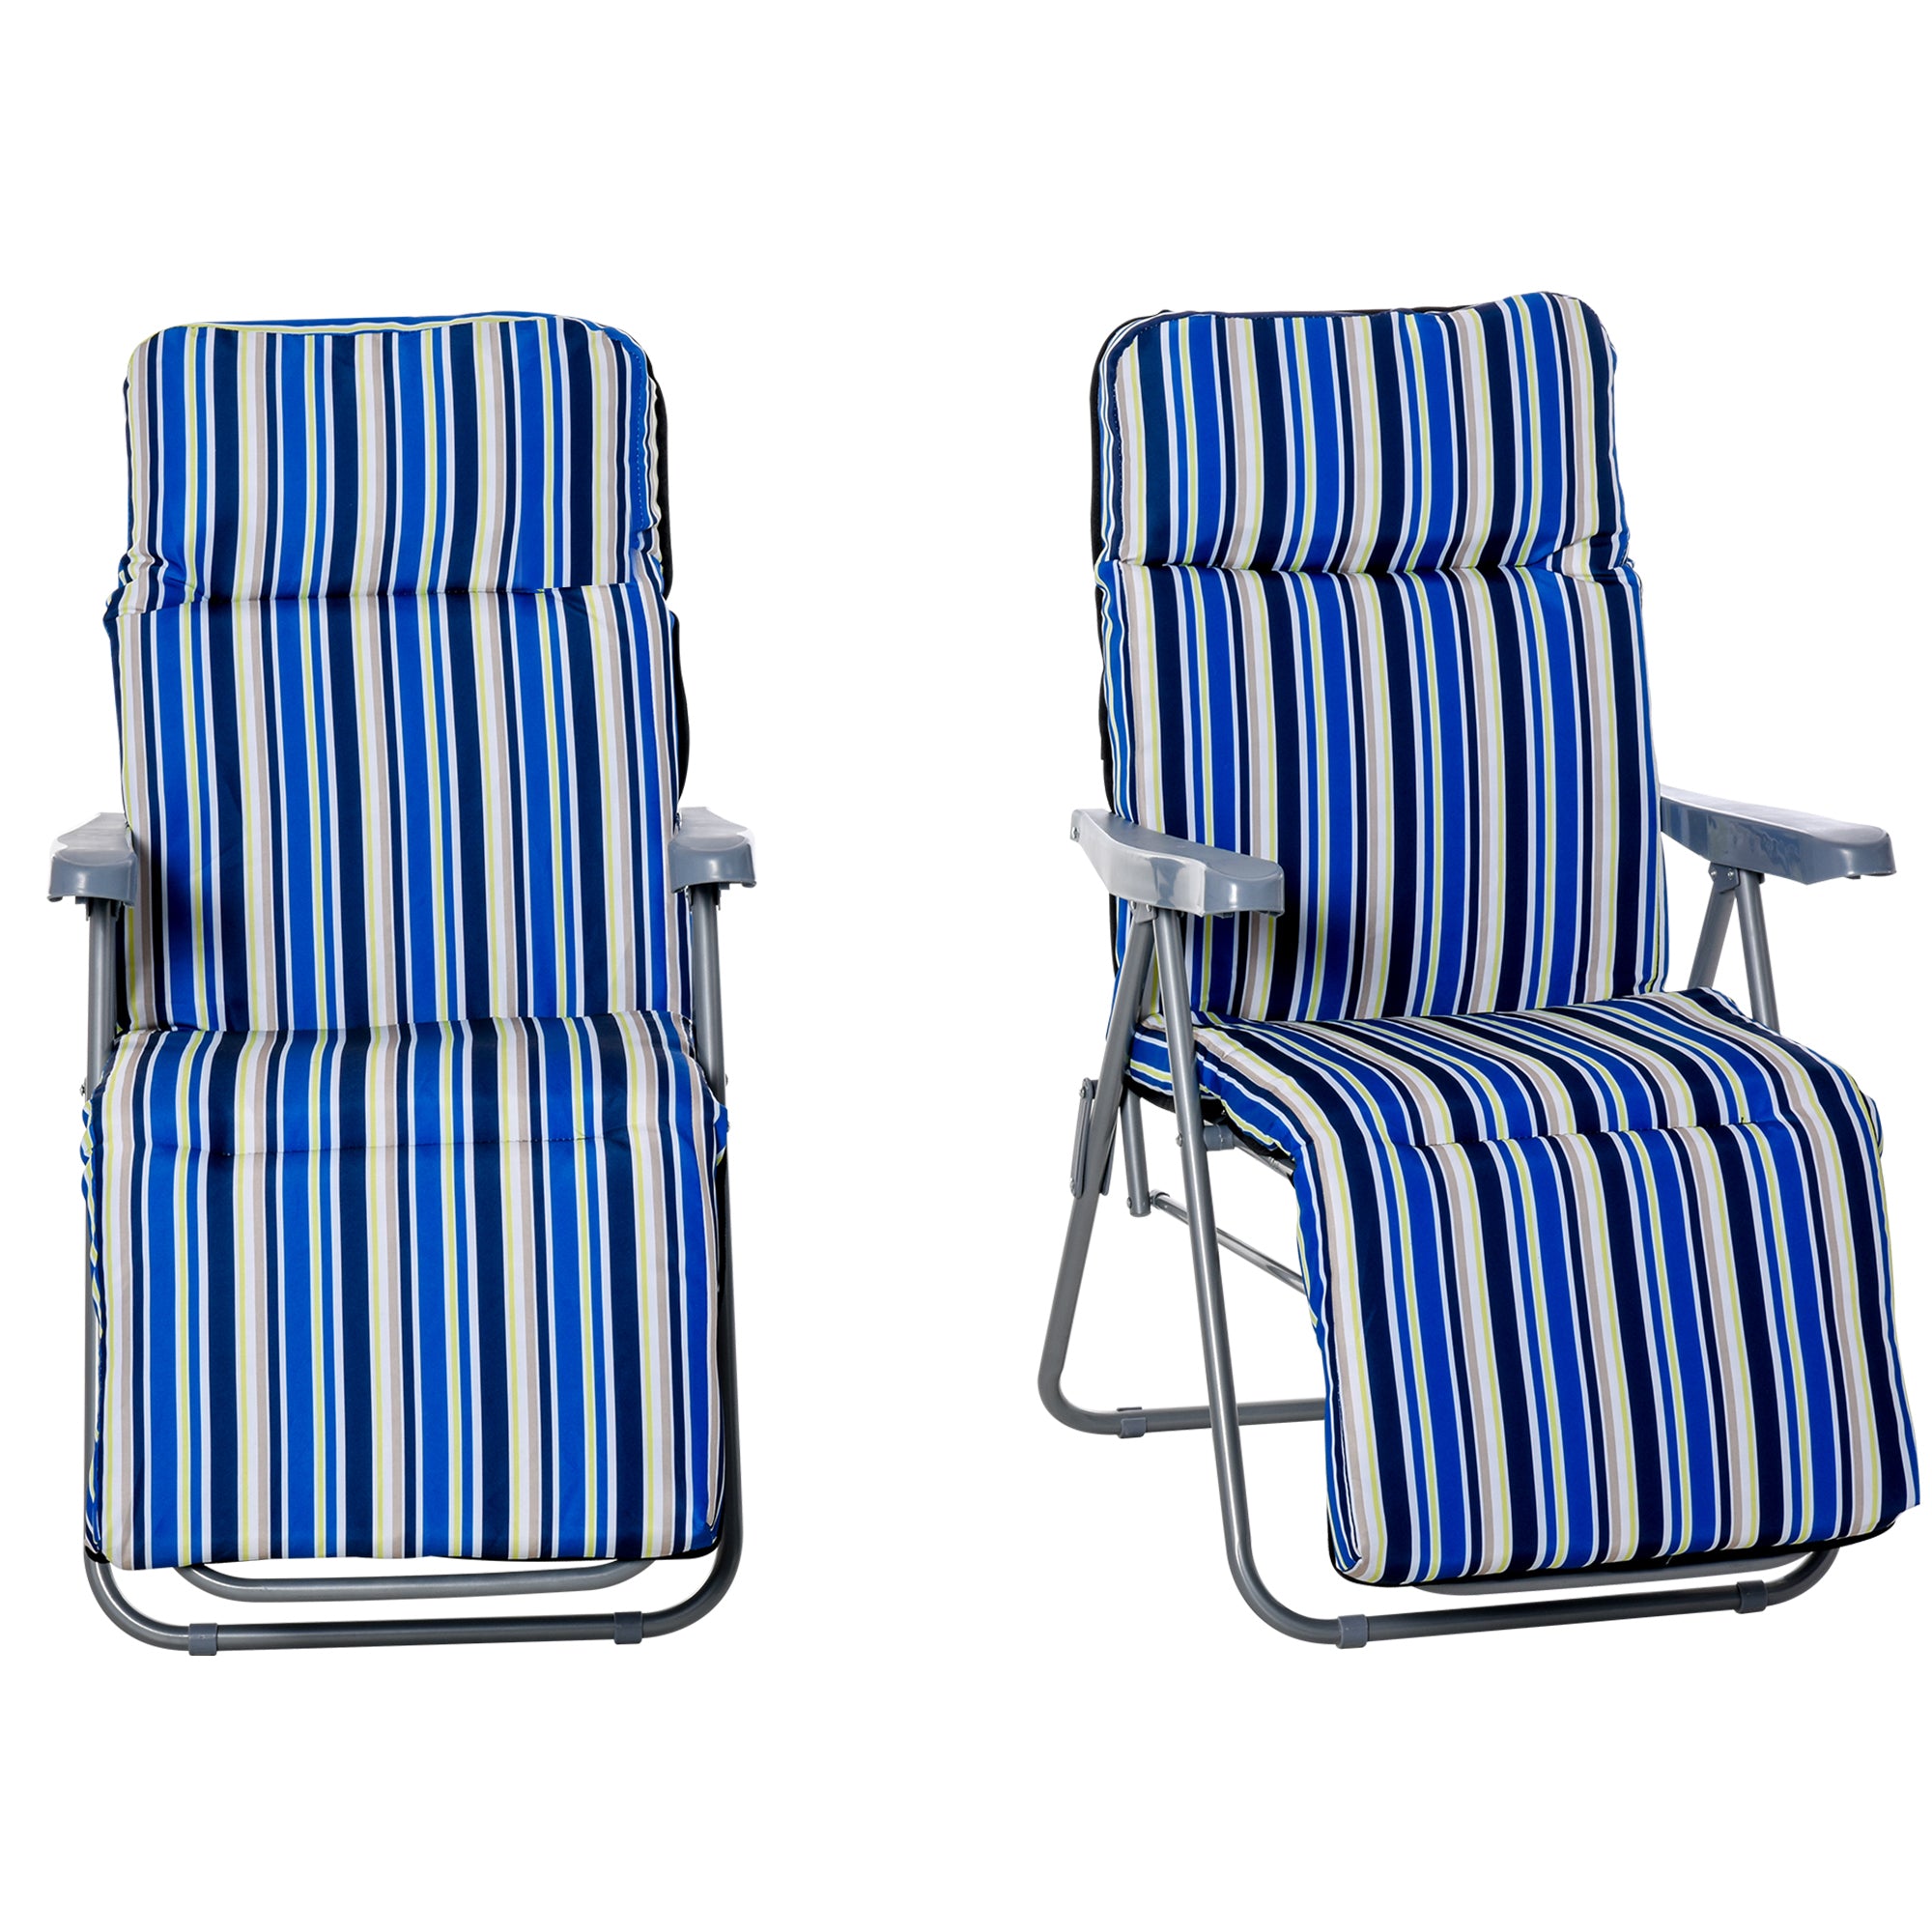 Outsunny Set of 2 Garden Sun Lounger Outdoor Reclining Seat Cushioned Seat Foldable Adjustable Recliner Blue and White - Inspirely